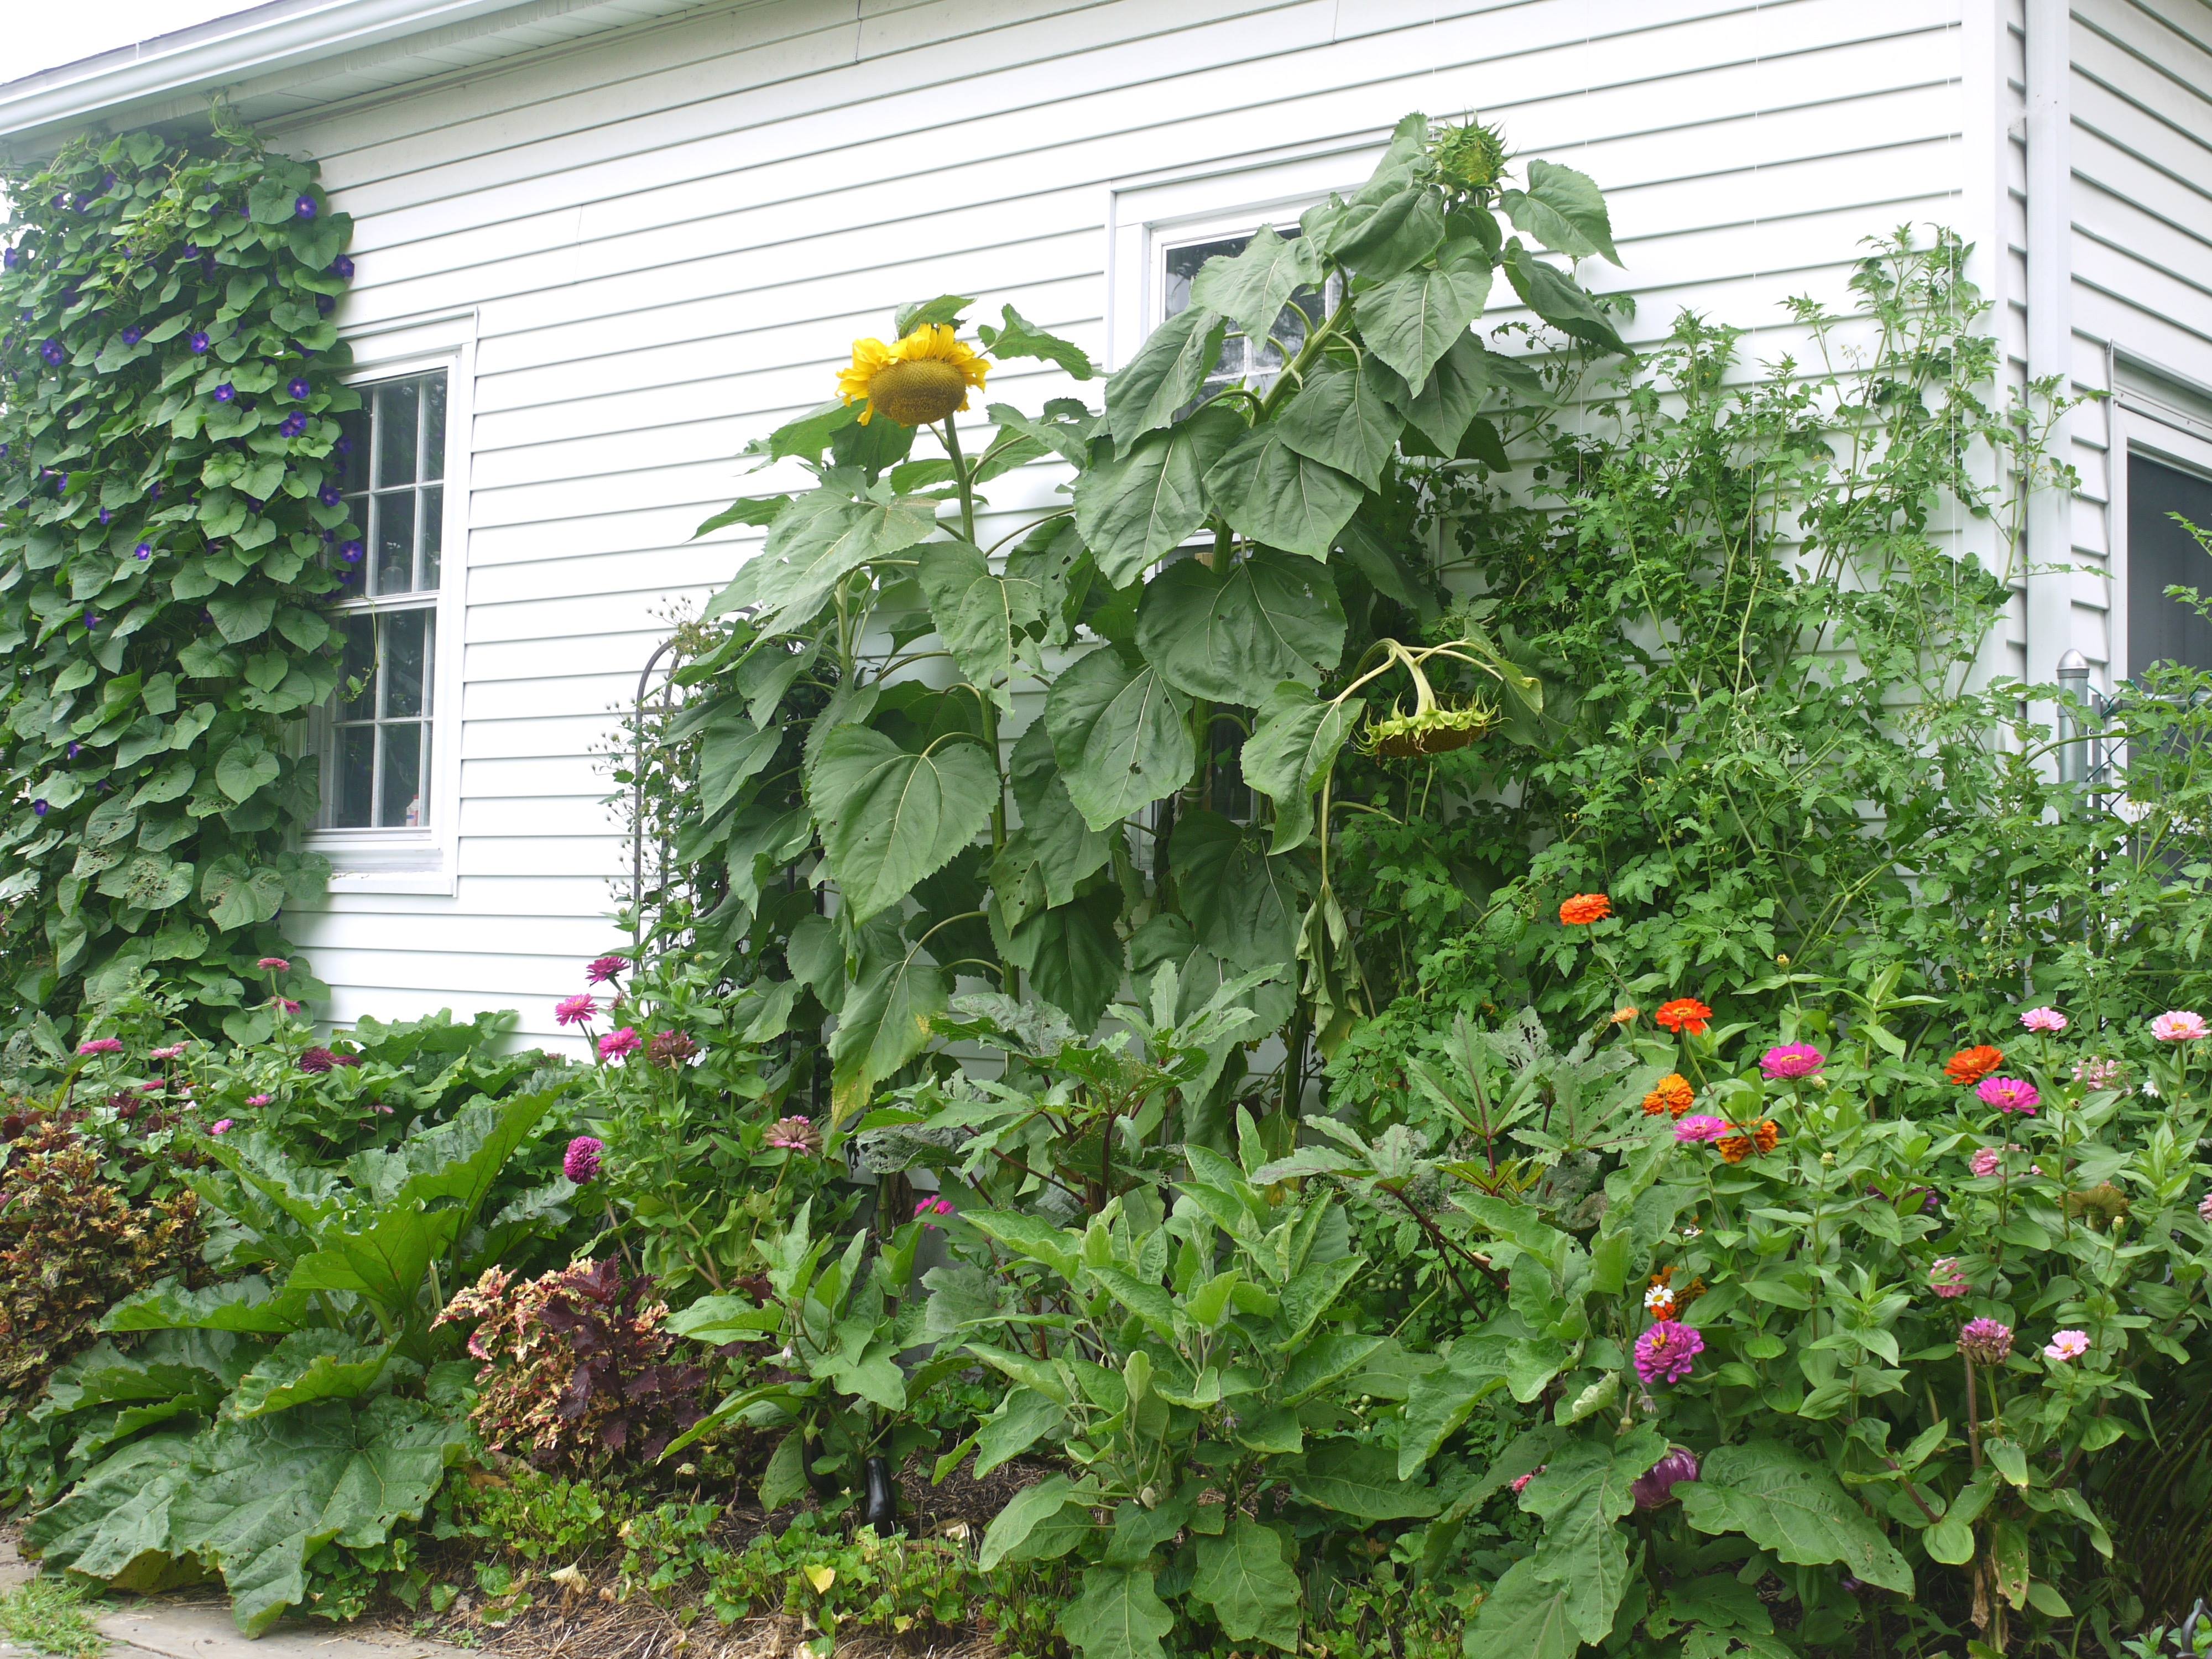 Giant sunflowers towering above the garden.